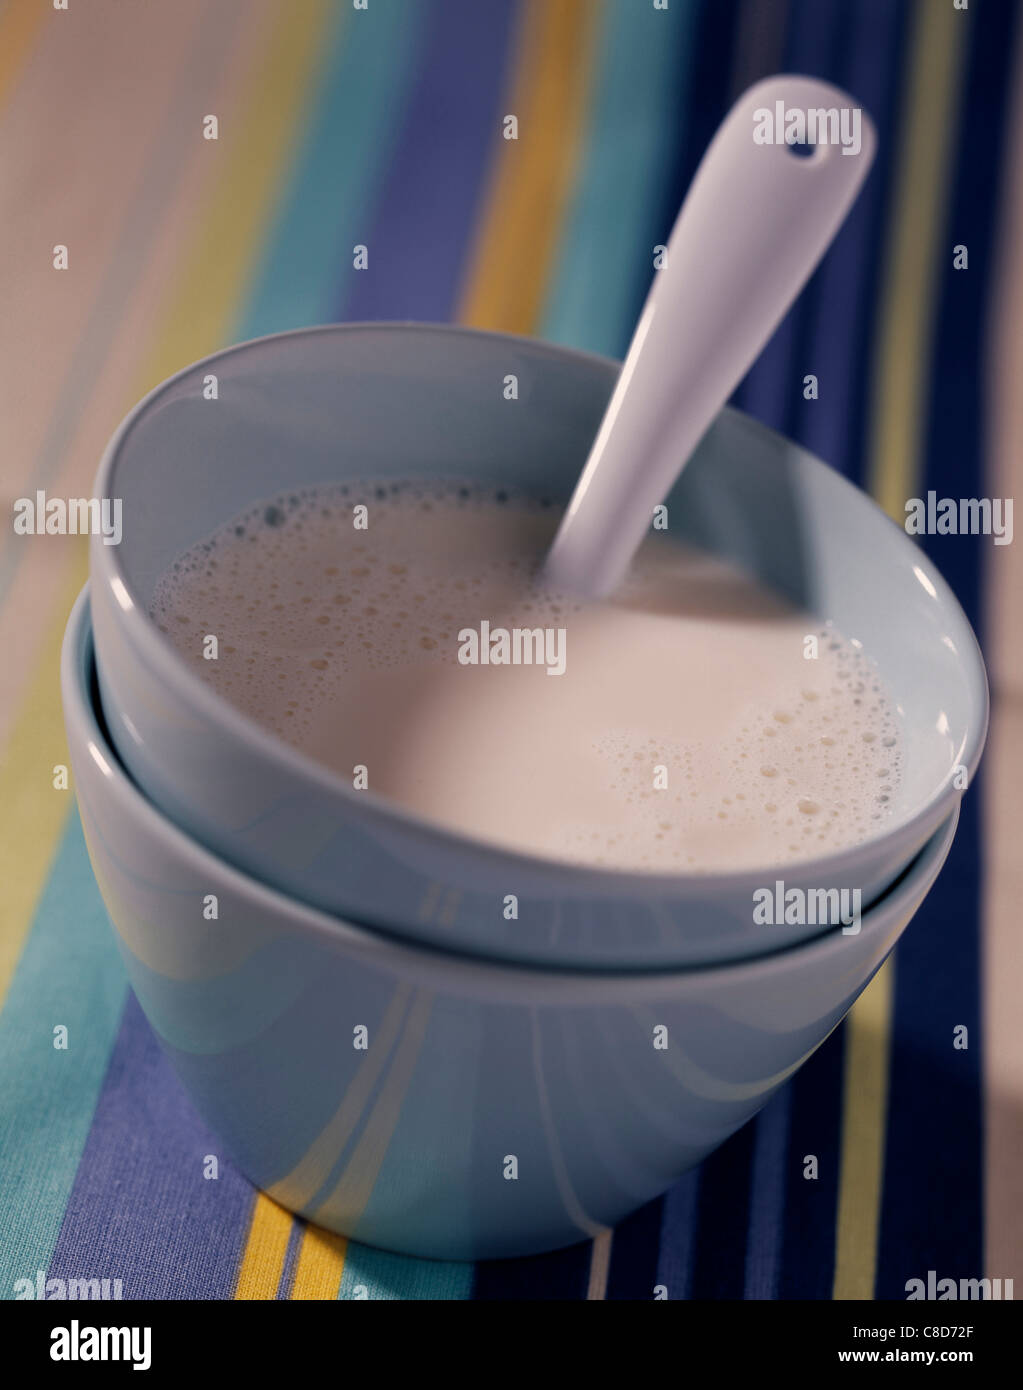 Bowl of milk with spoon Stock Photo